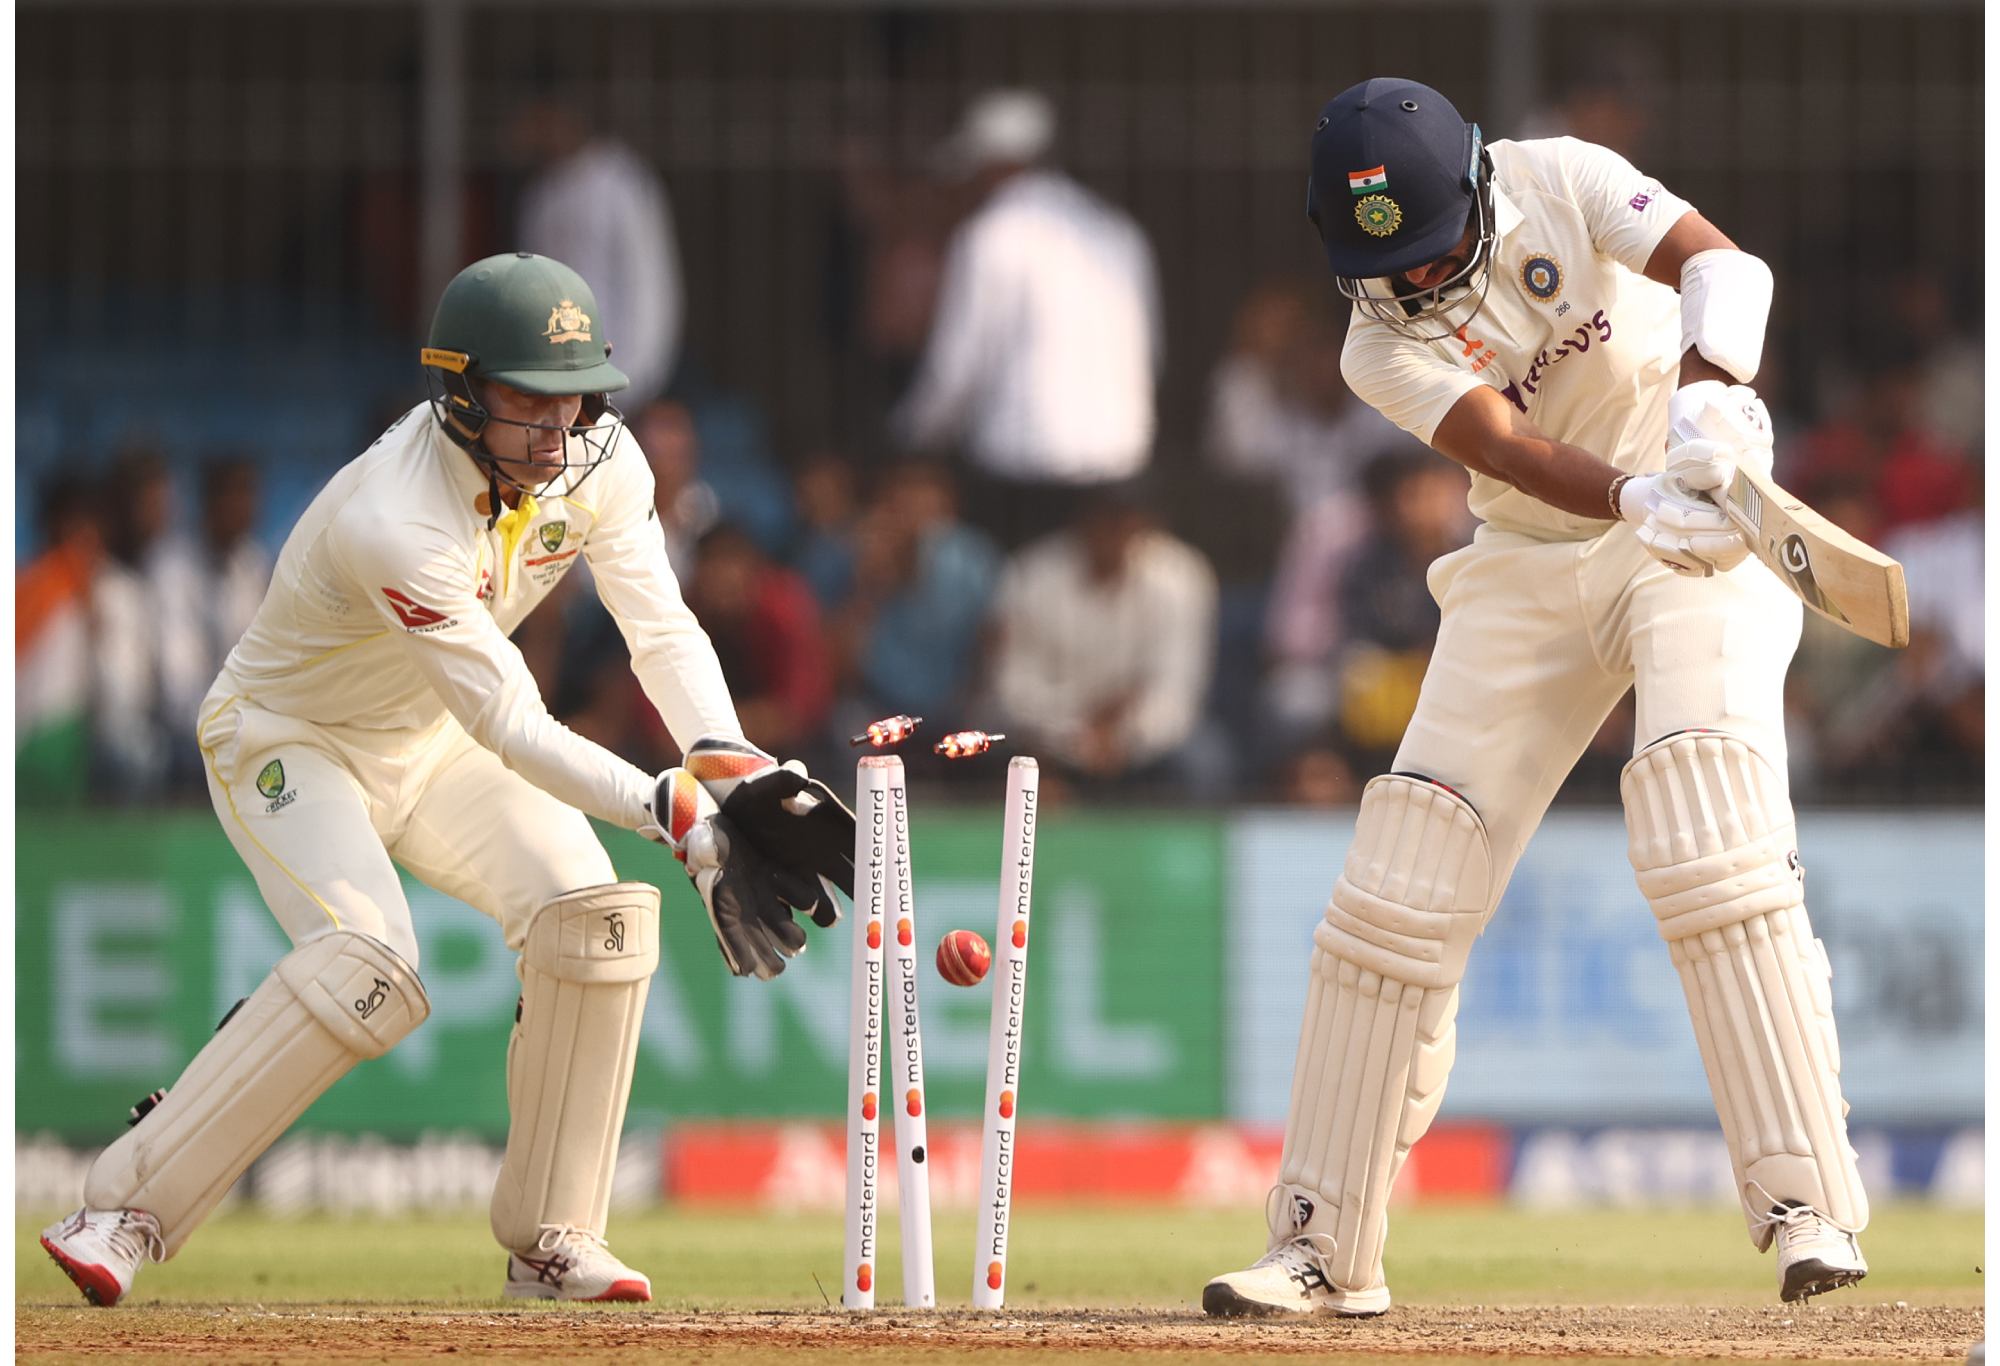 INDORE, INDIA - MARCH 01: Cheteshwar Pujara of India is bowled by Nathan Lyon of Australia during day one of the Third Test match in the series between India and Australia at Holkare Cricket Stadium on March 01, 2023 in Indore, India. (Photo by Robert Cianflone/Getty Images)